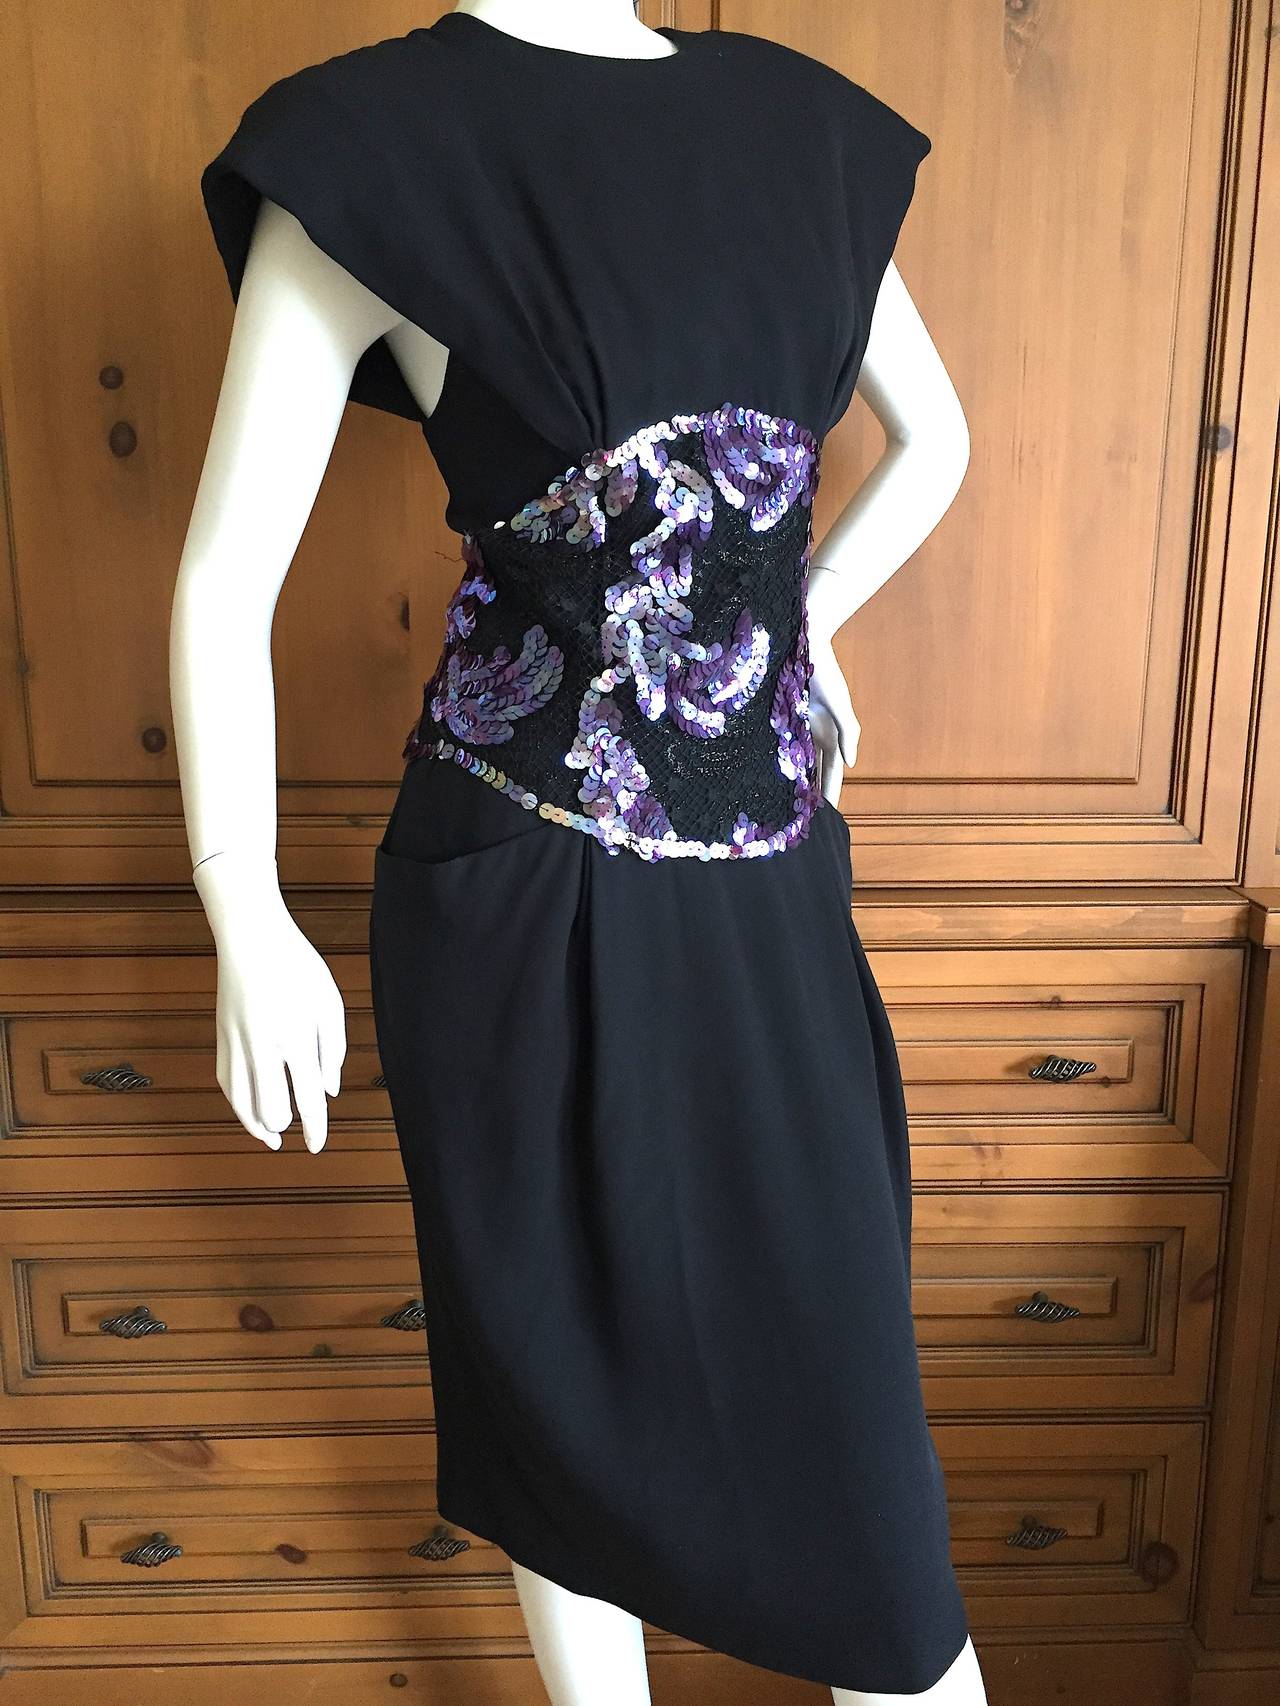 Beautiful black crepe dress from Geoffrey Beene circa 1985.
There is a sequin band across the waist  like an Obi Belt.
Size 10
Bust 38